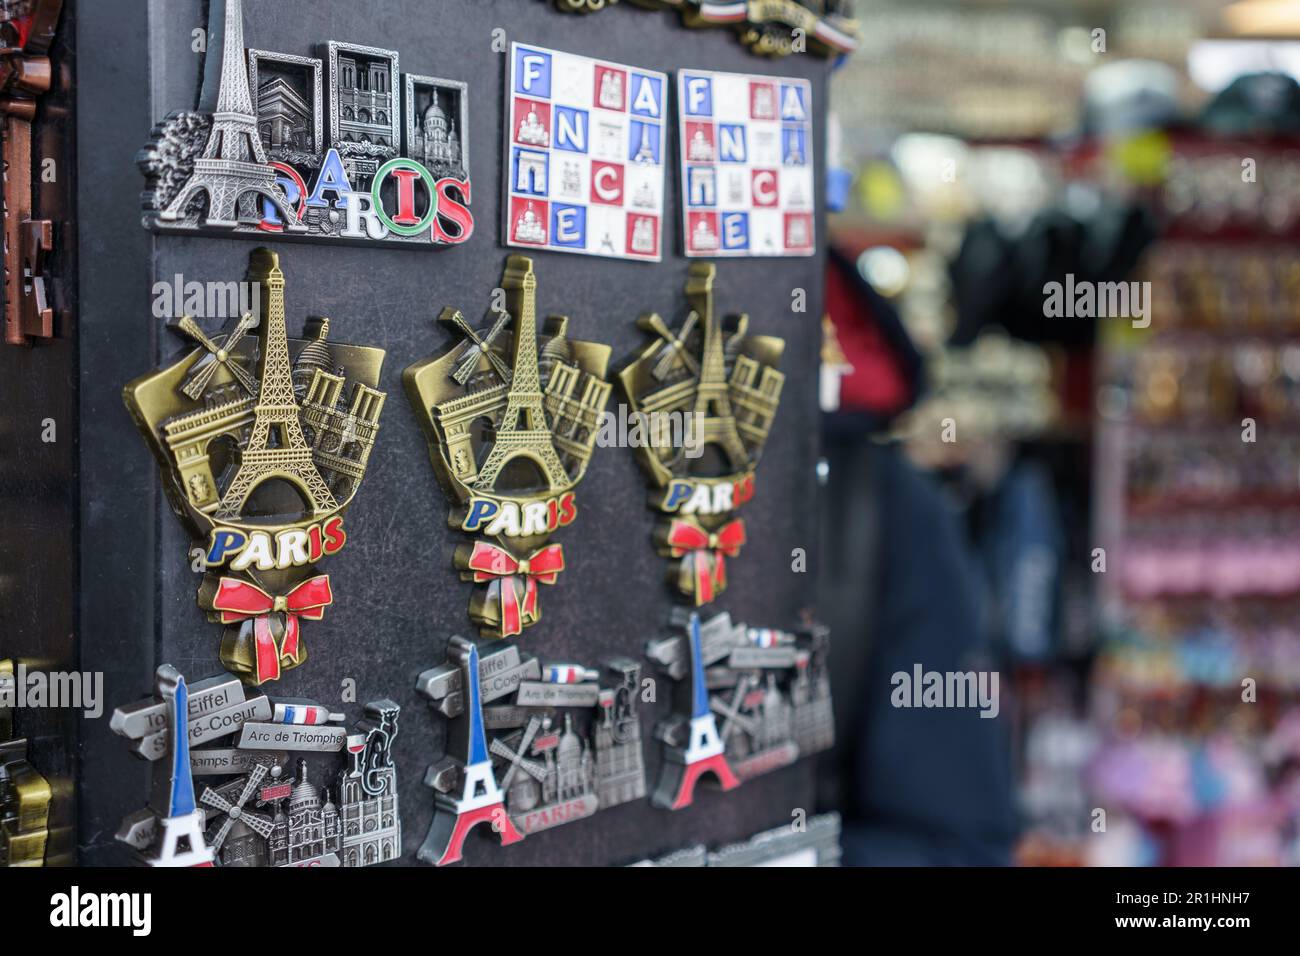 Souvenir Magnets With The Symbols Of Paris In The Gift Shop Paris France  Stock Photo - Download Image Now - iStock